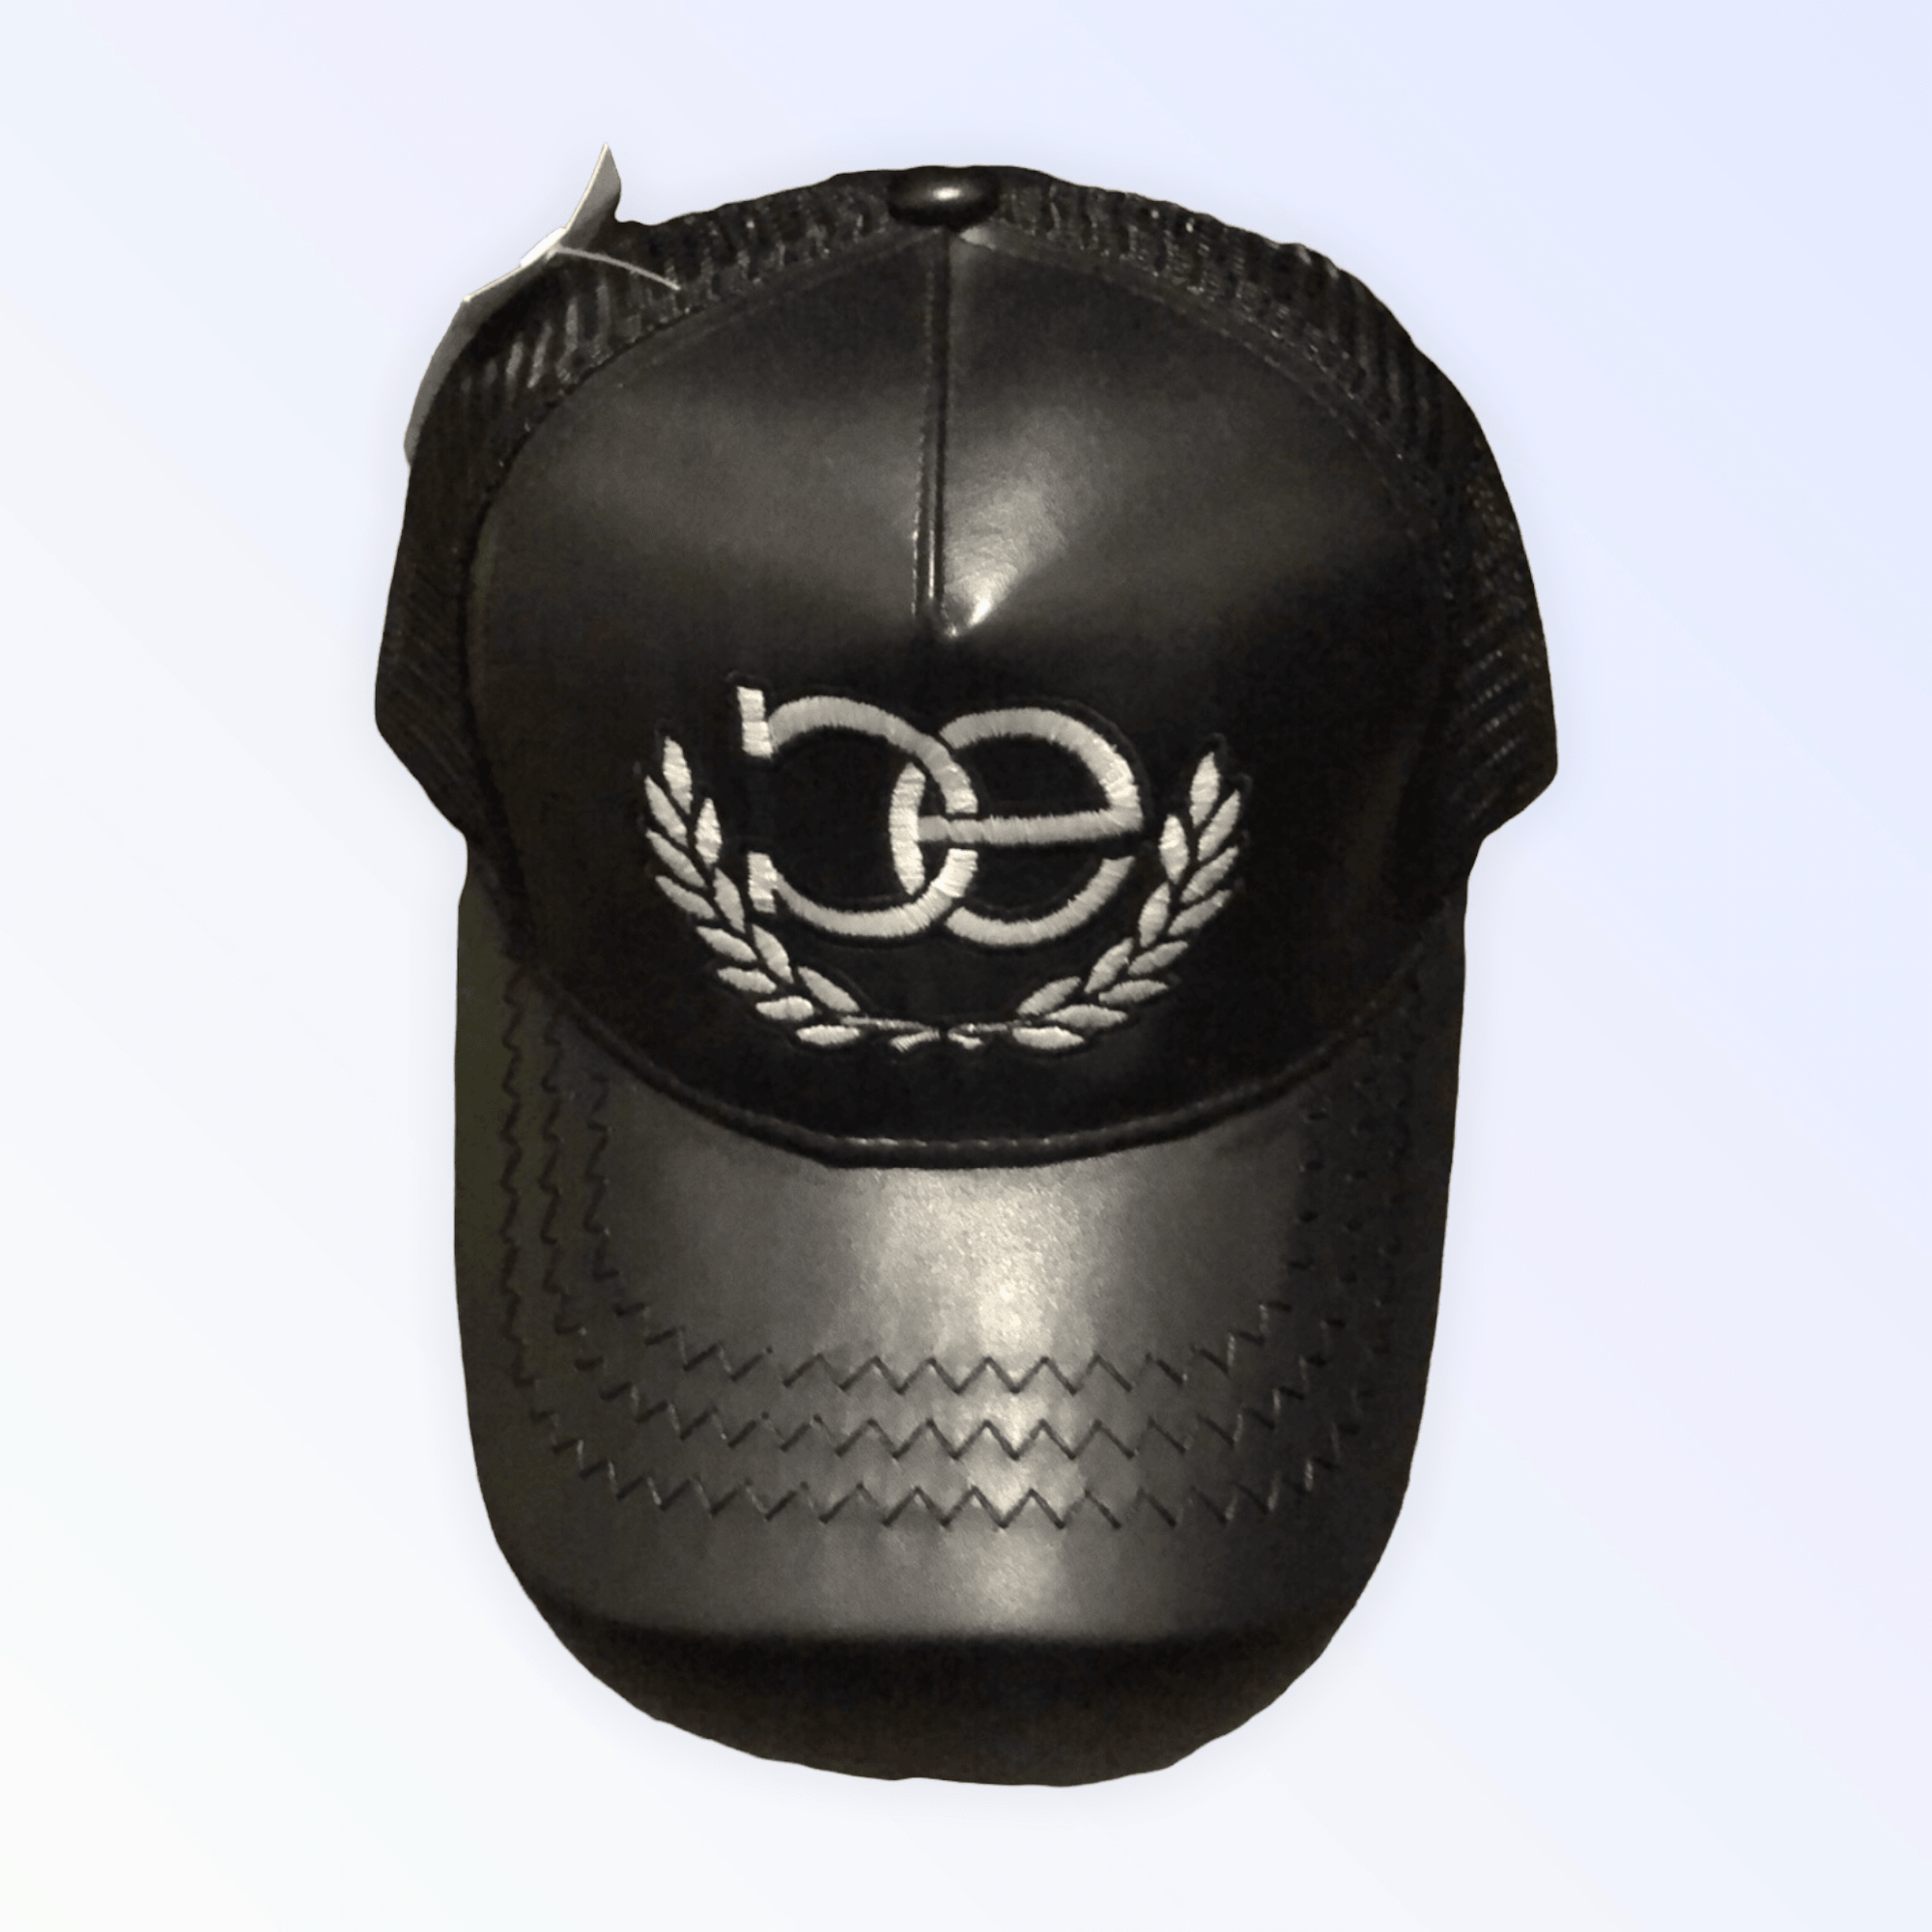 “CE” Leather MeshTrucker hat - Certified Excellence Clothing